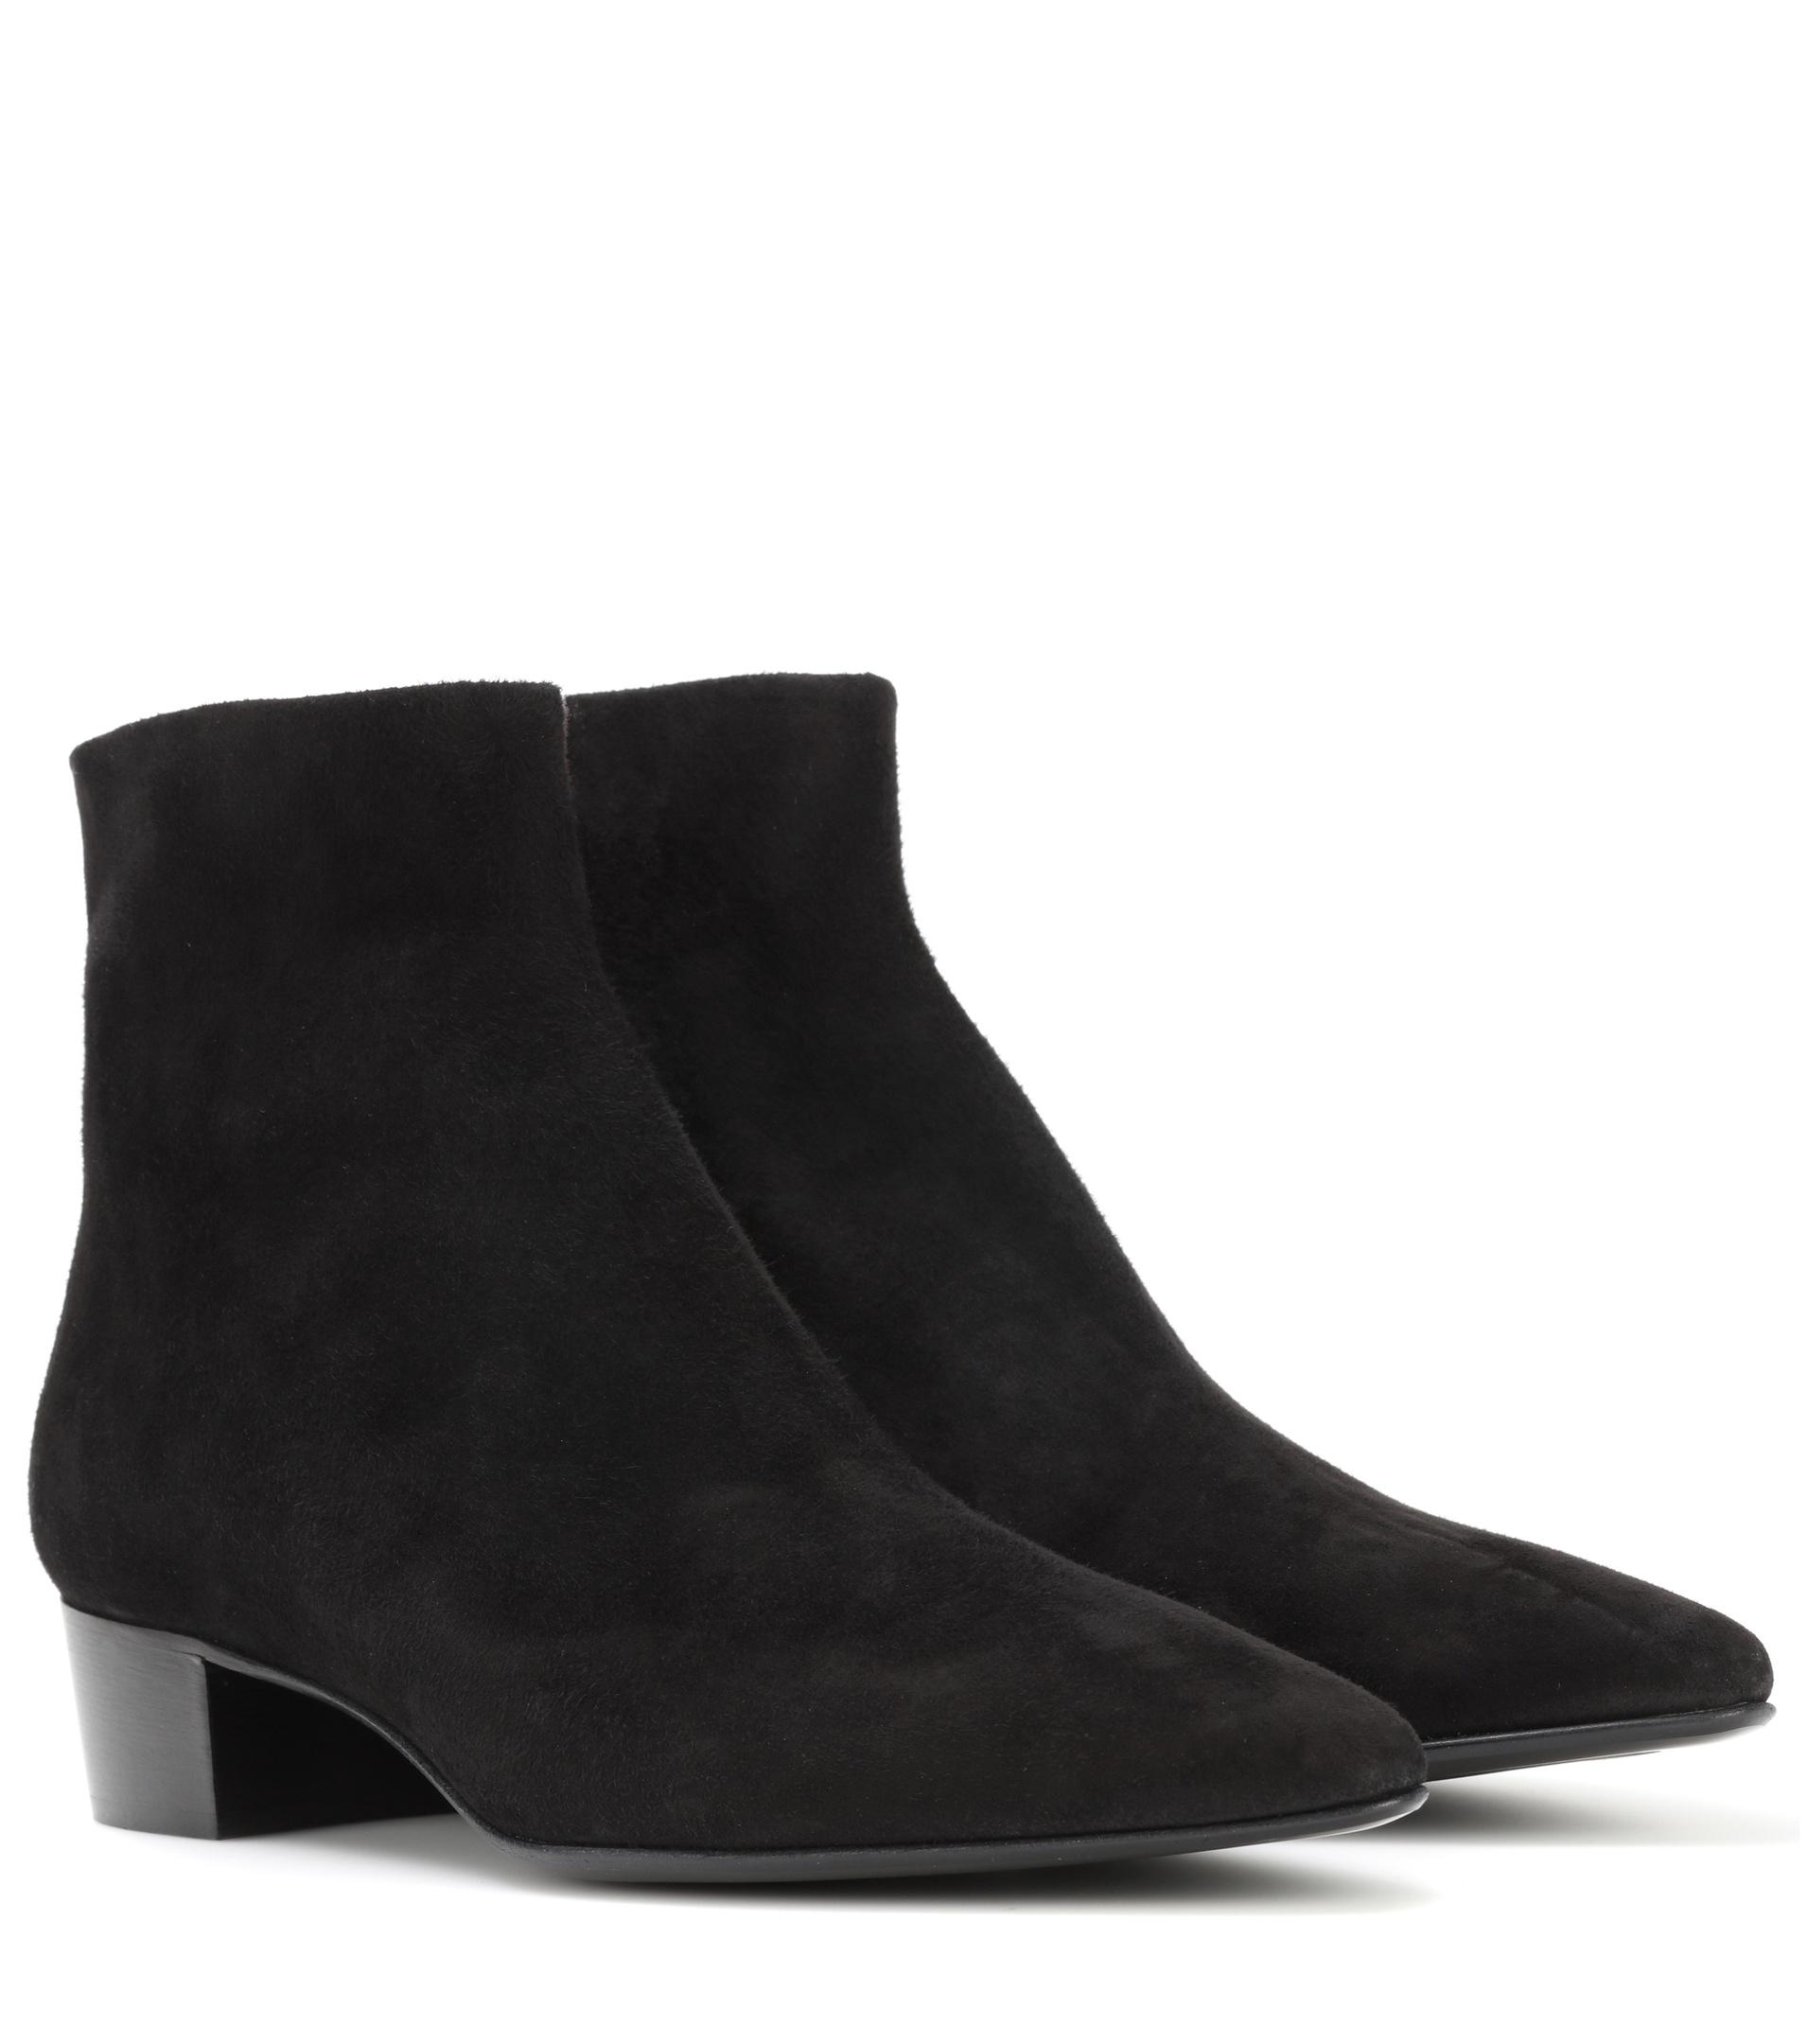 The Row Ambra Suede Ankle Boots in Black - Lyst